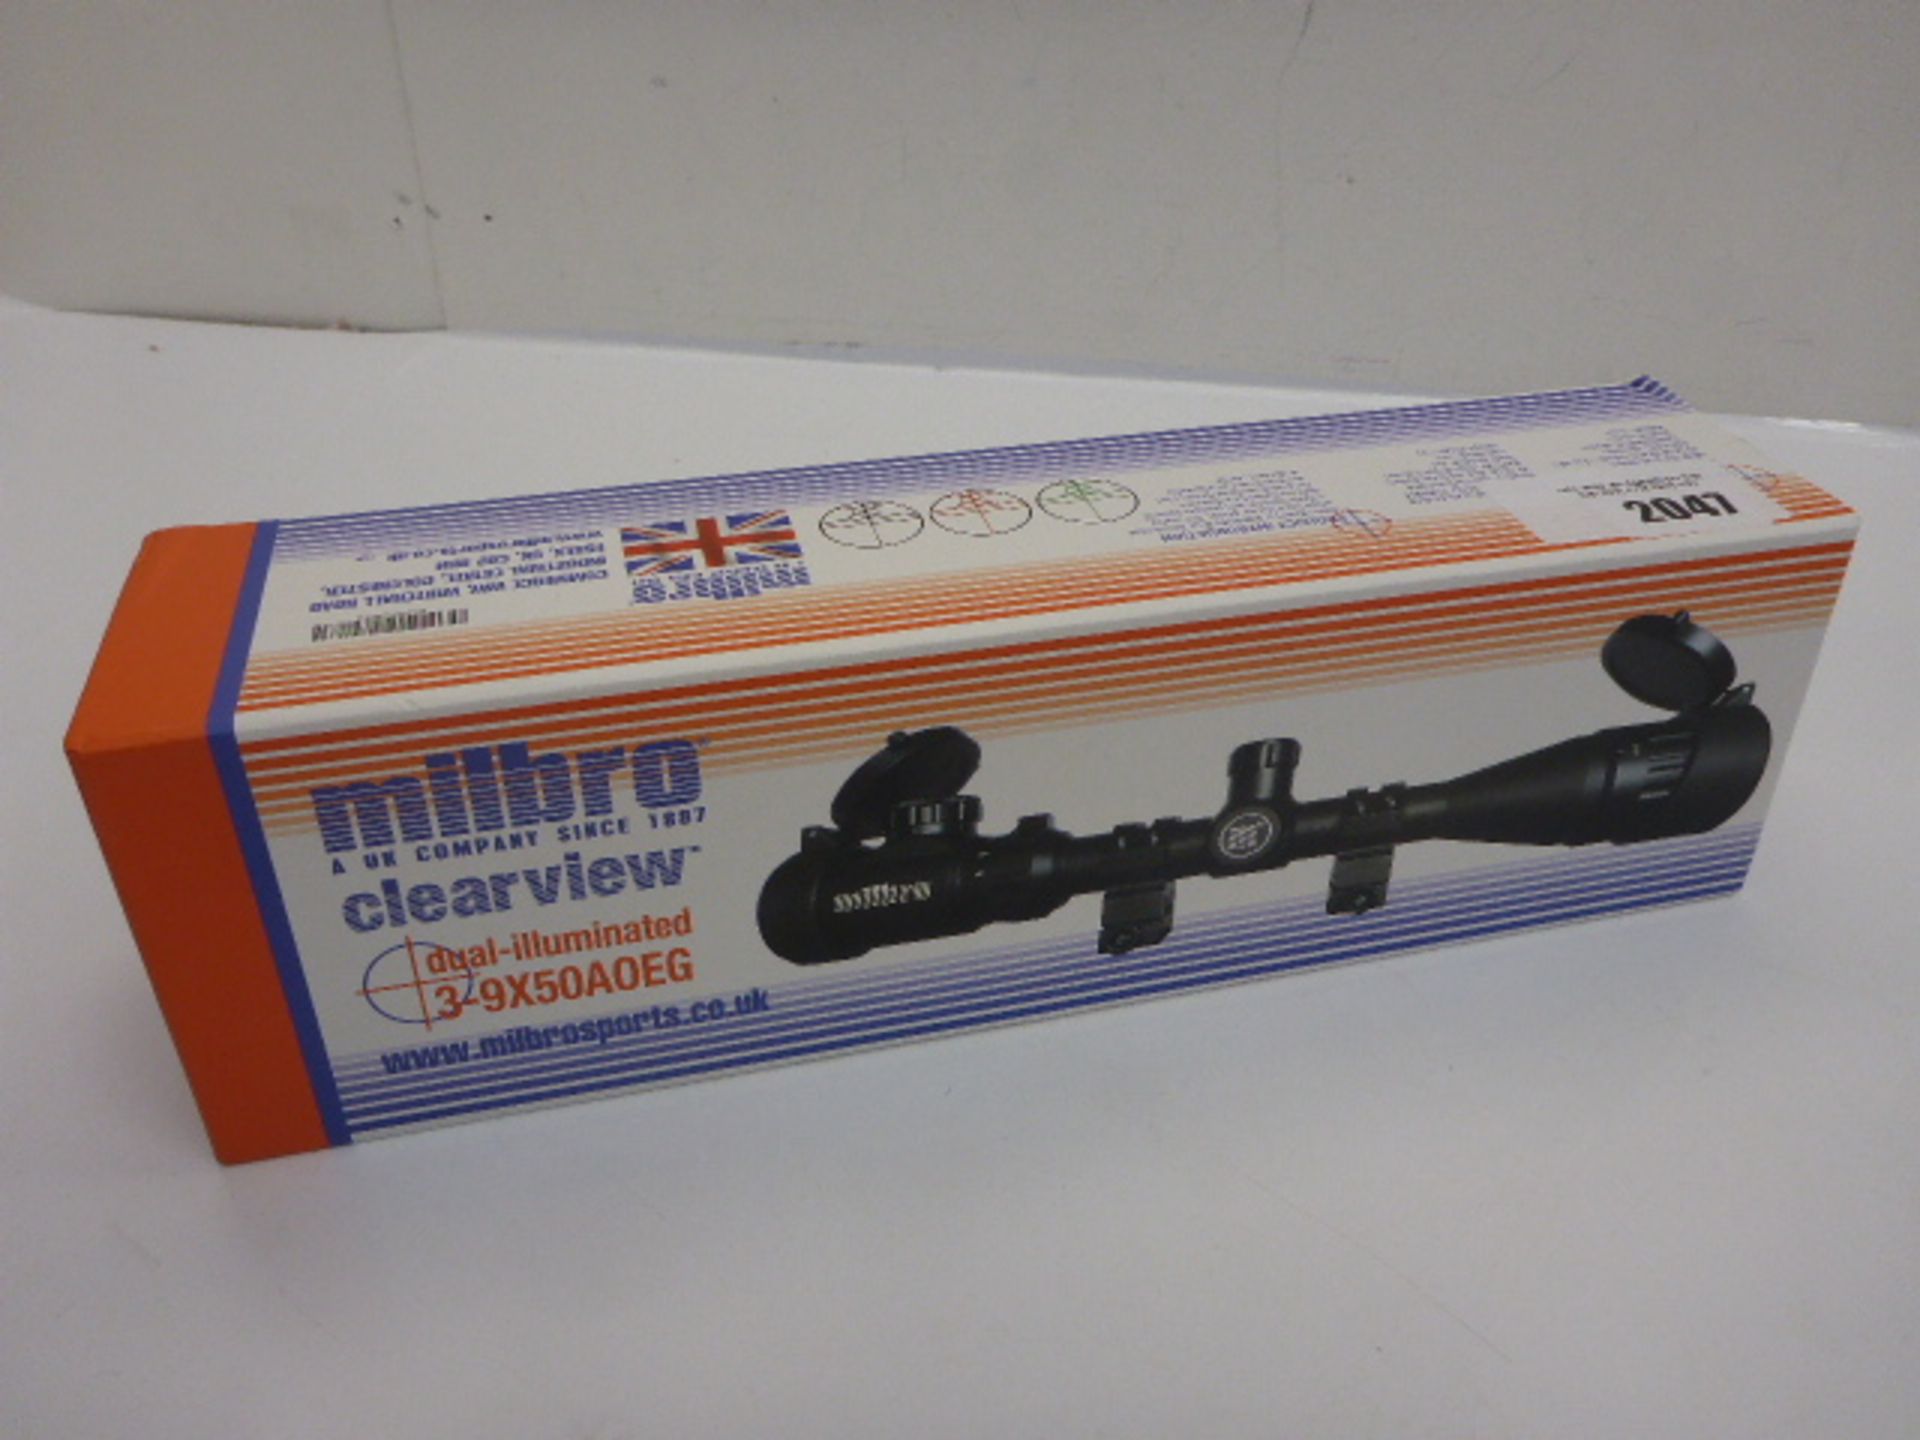 Milbro clearview 3-9X50AOEG scope boxed.